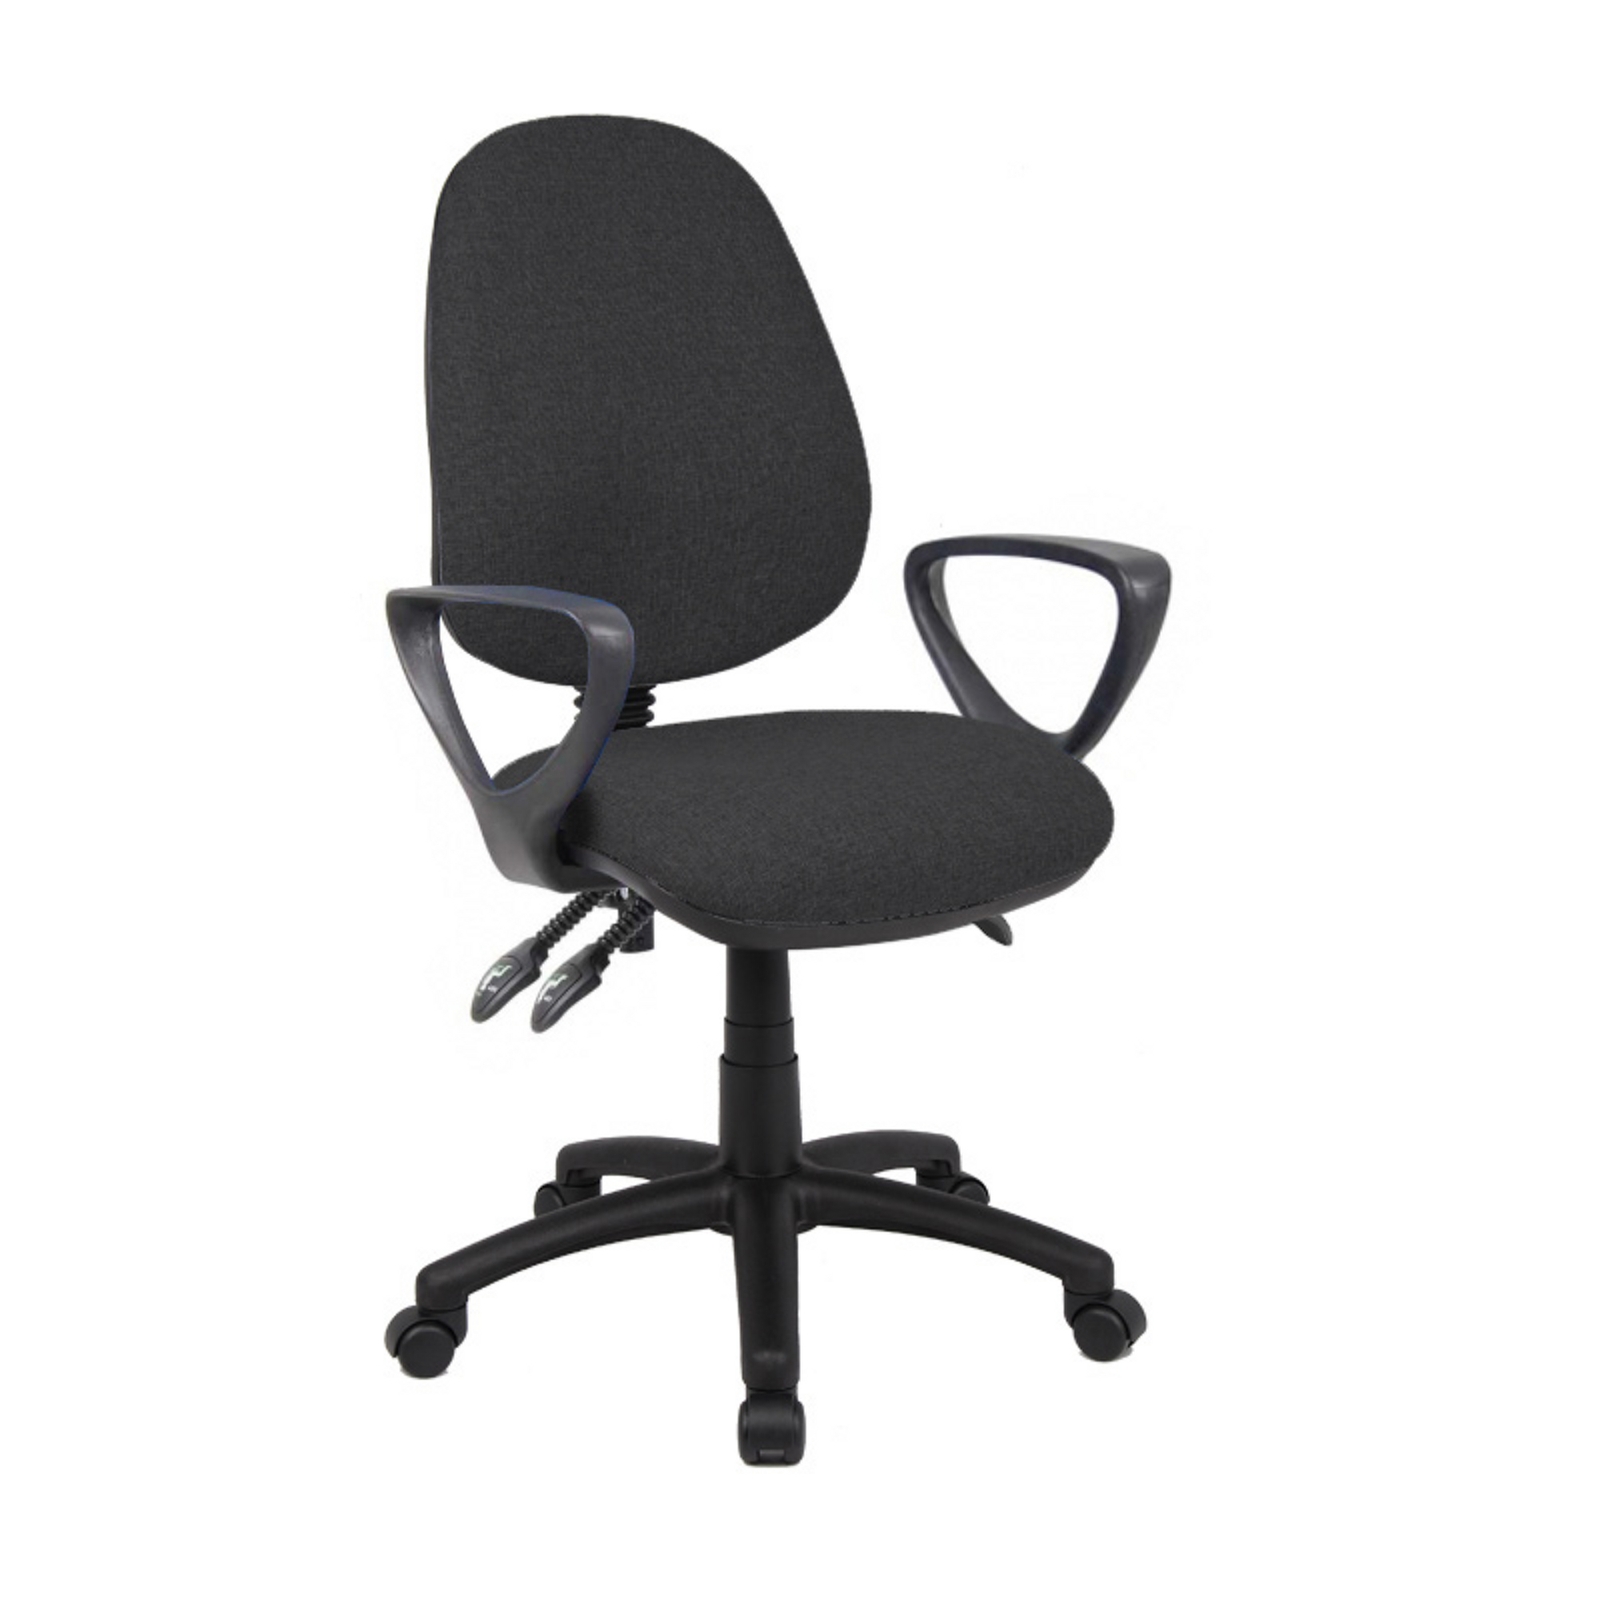 Vantage 3 Lever Fixed Arms Chair Black